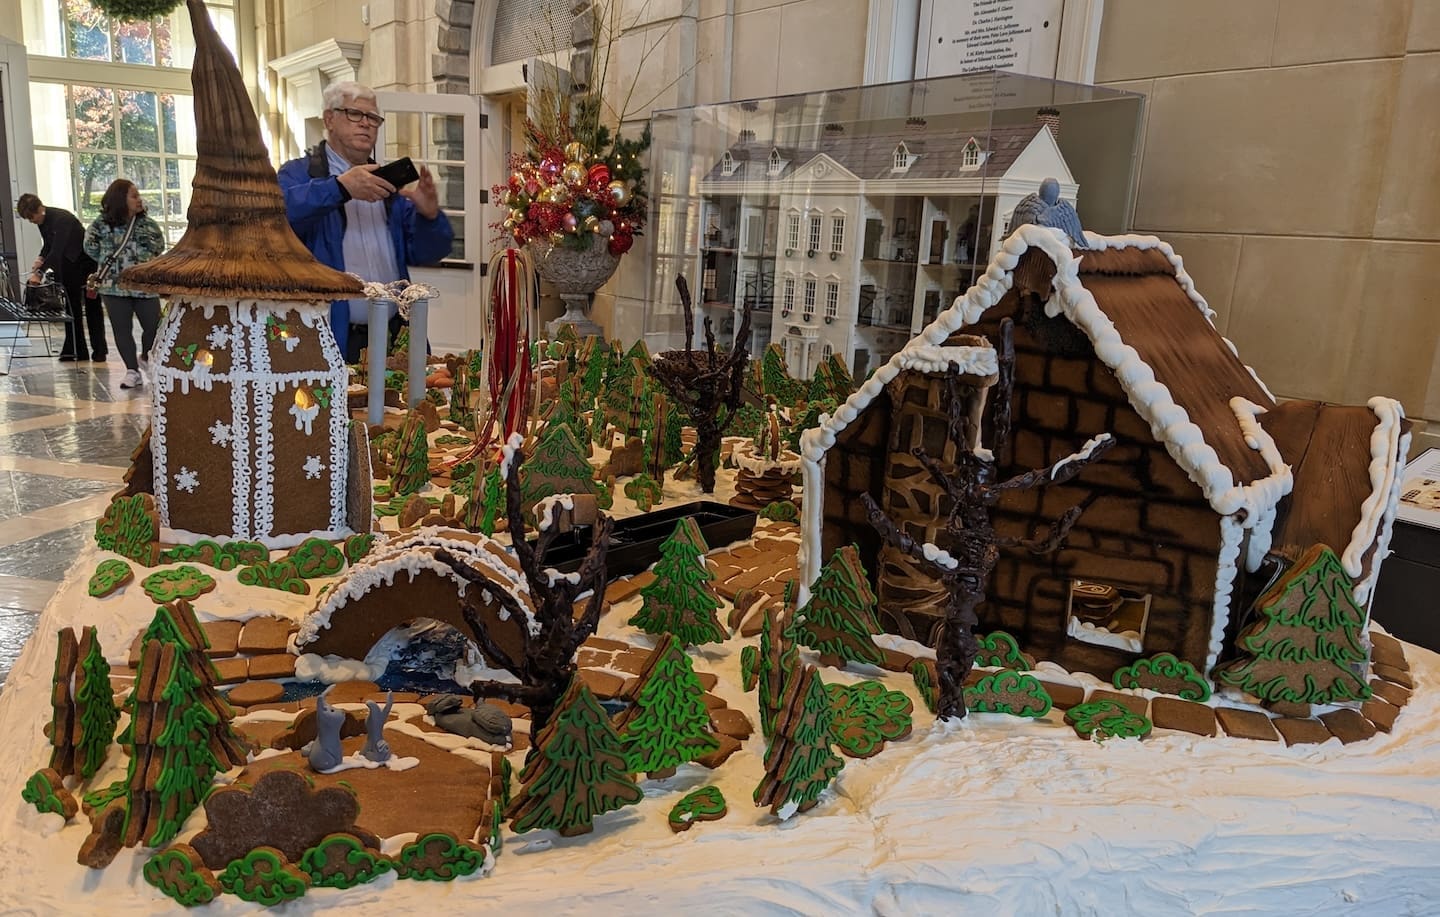 Every major feature of Enchanted Woods is captured in gingerbread. (Ken Mammarella photo)